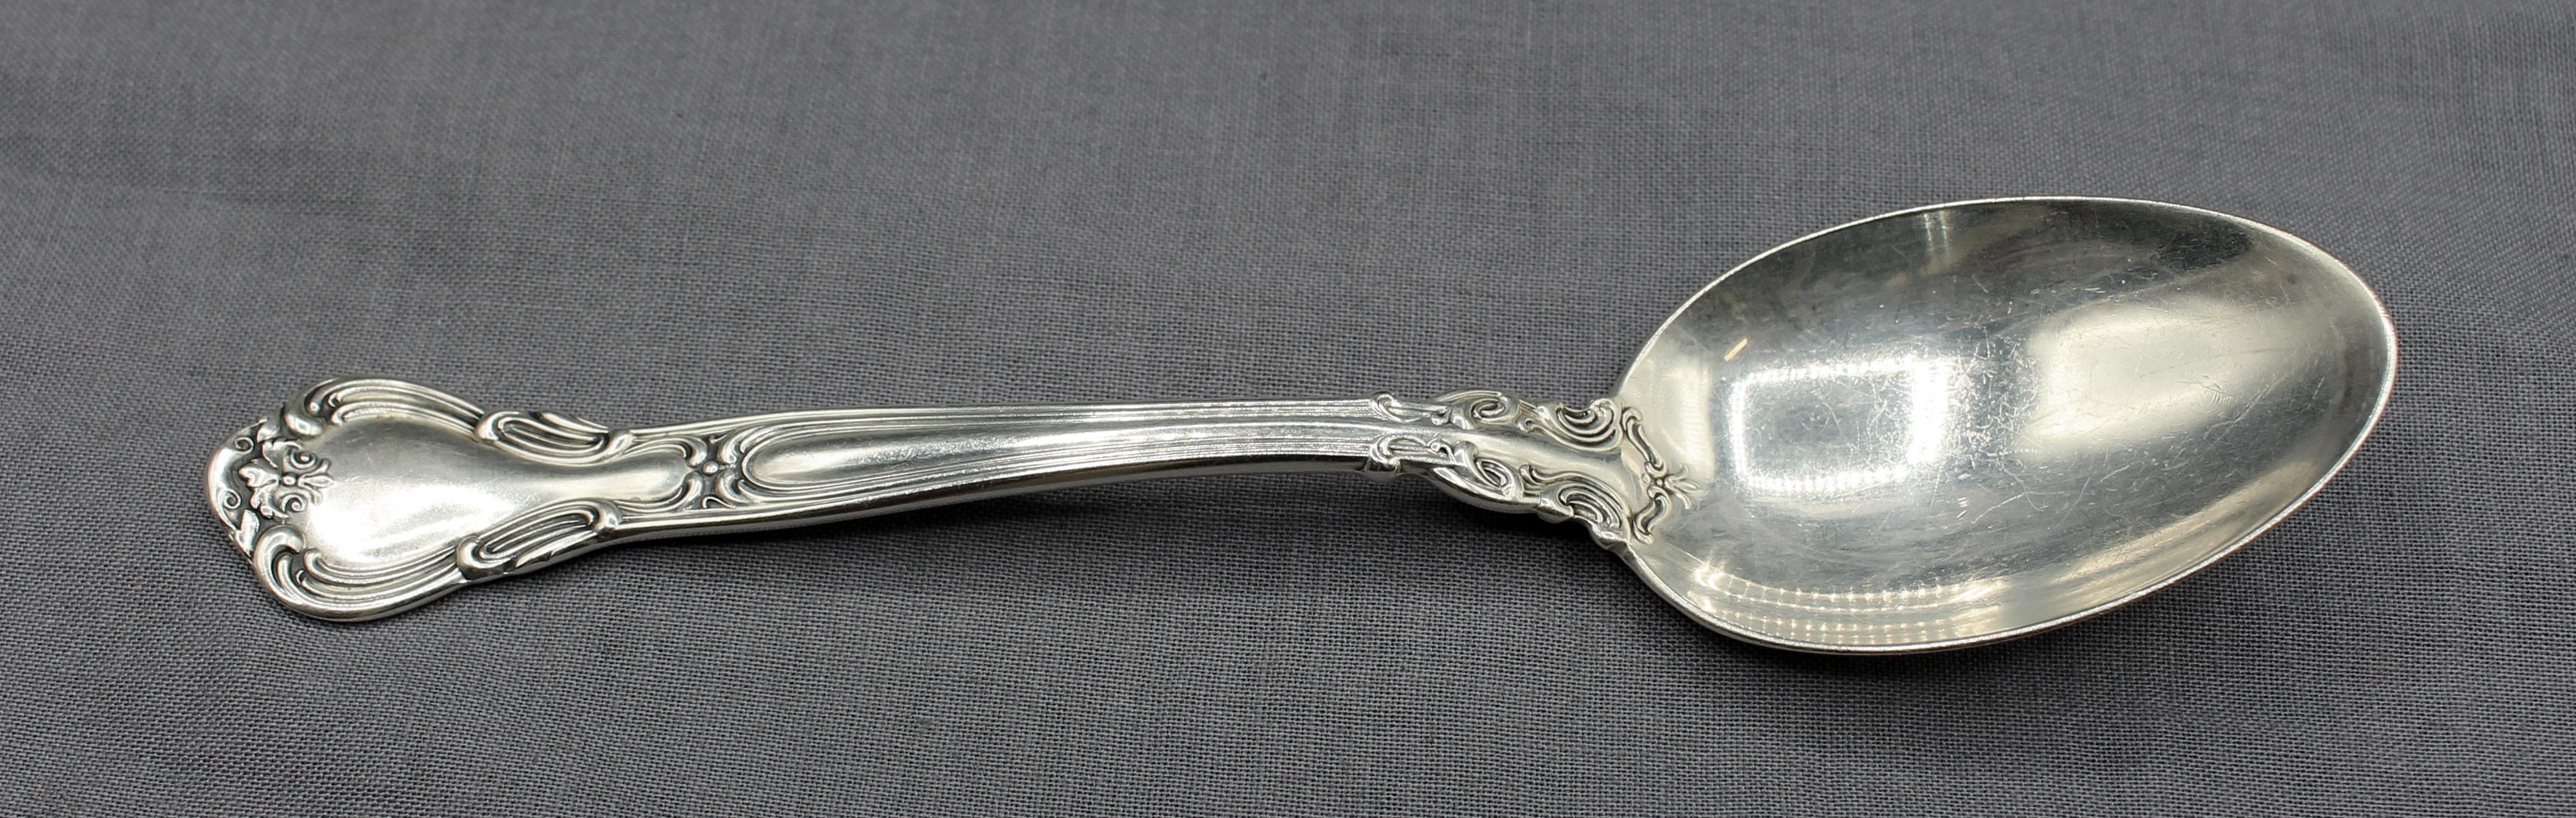 Modern Circa 1970s Set of 4 Chantilly Sterling Teaspoons by Gorham For Sale